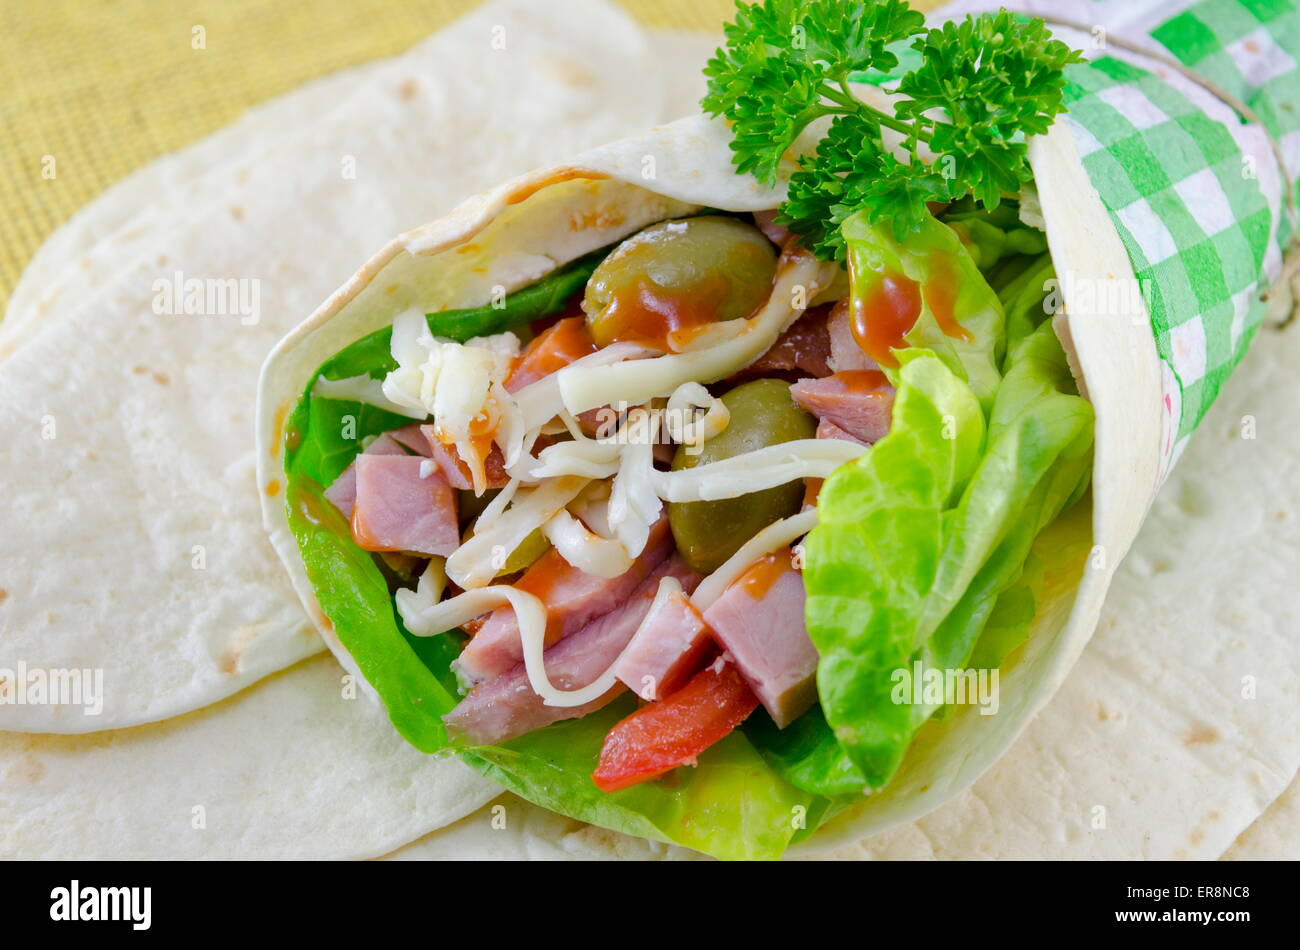 Tortilla sandwich with fresh vegetables and ham Stock Photo